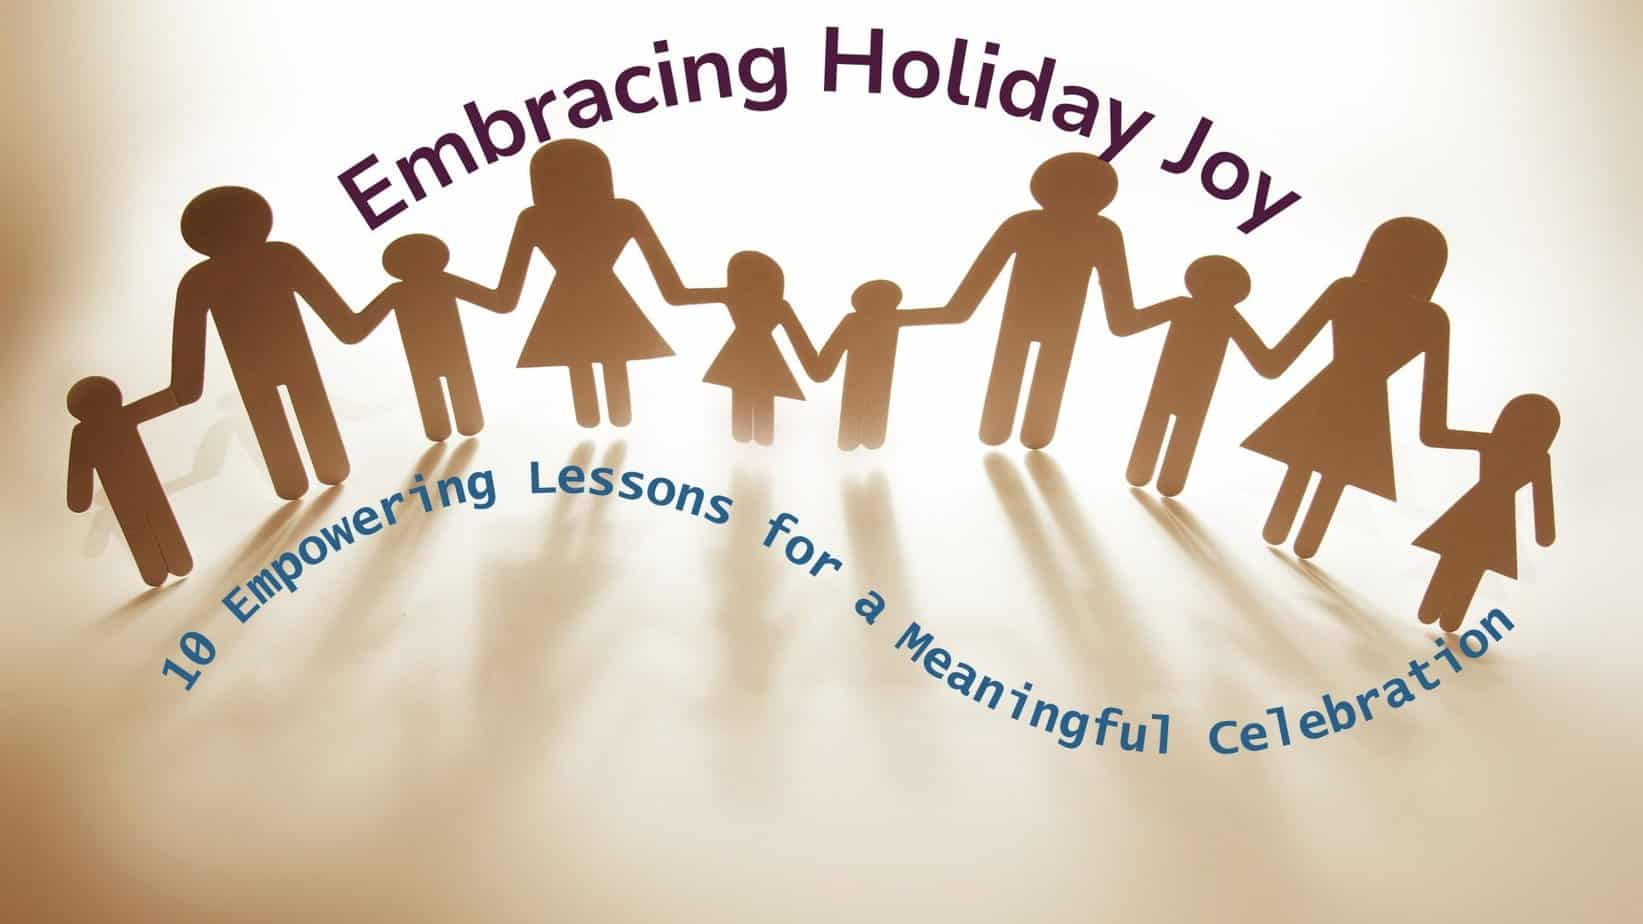 You are currently viewing Embracing Holiday Joy: 10 Empowering Lessons for a Meaningful Celebration!